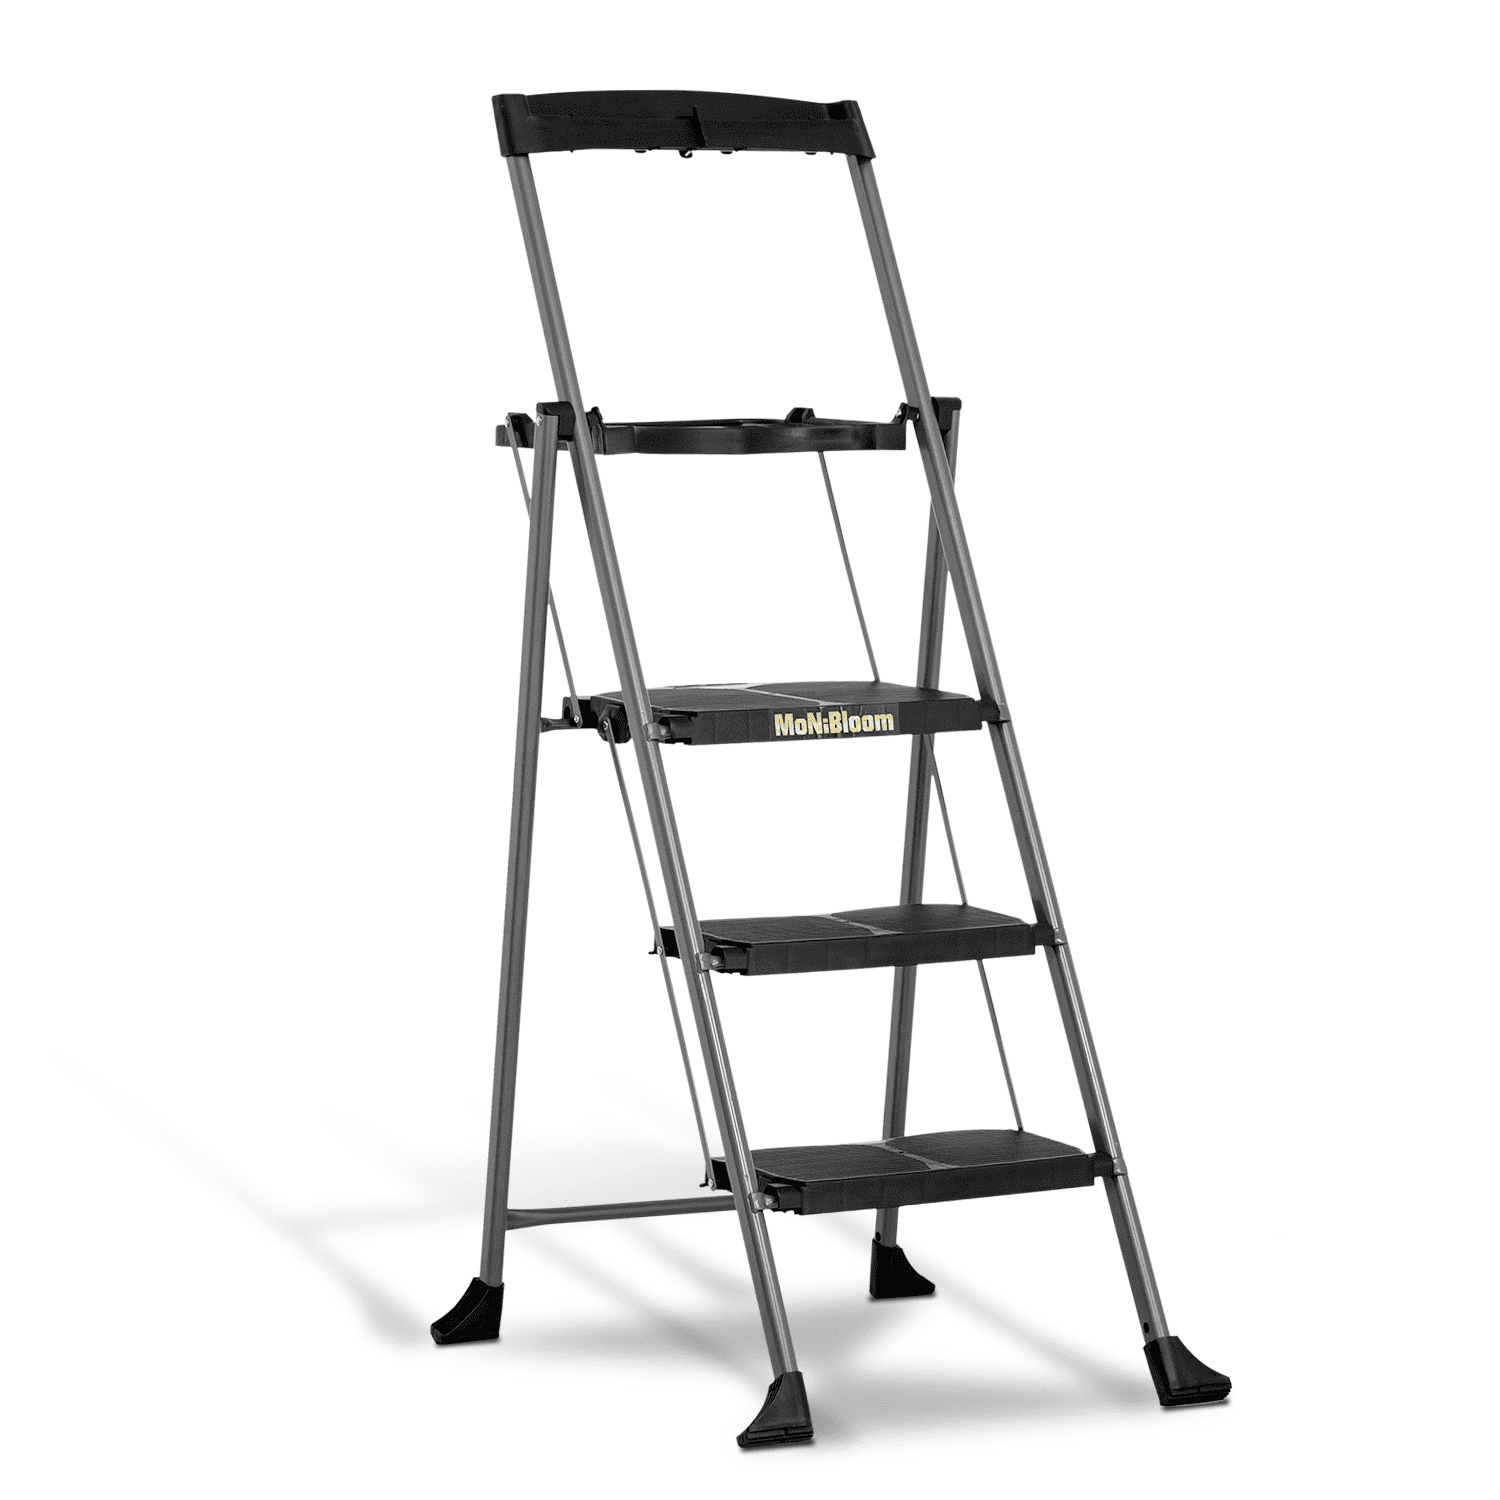 Louisville Ladder AS2110 10-feet as The Picture SHOWN FT for sale online 